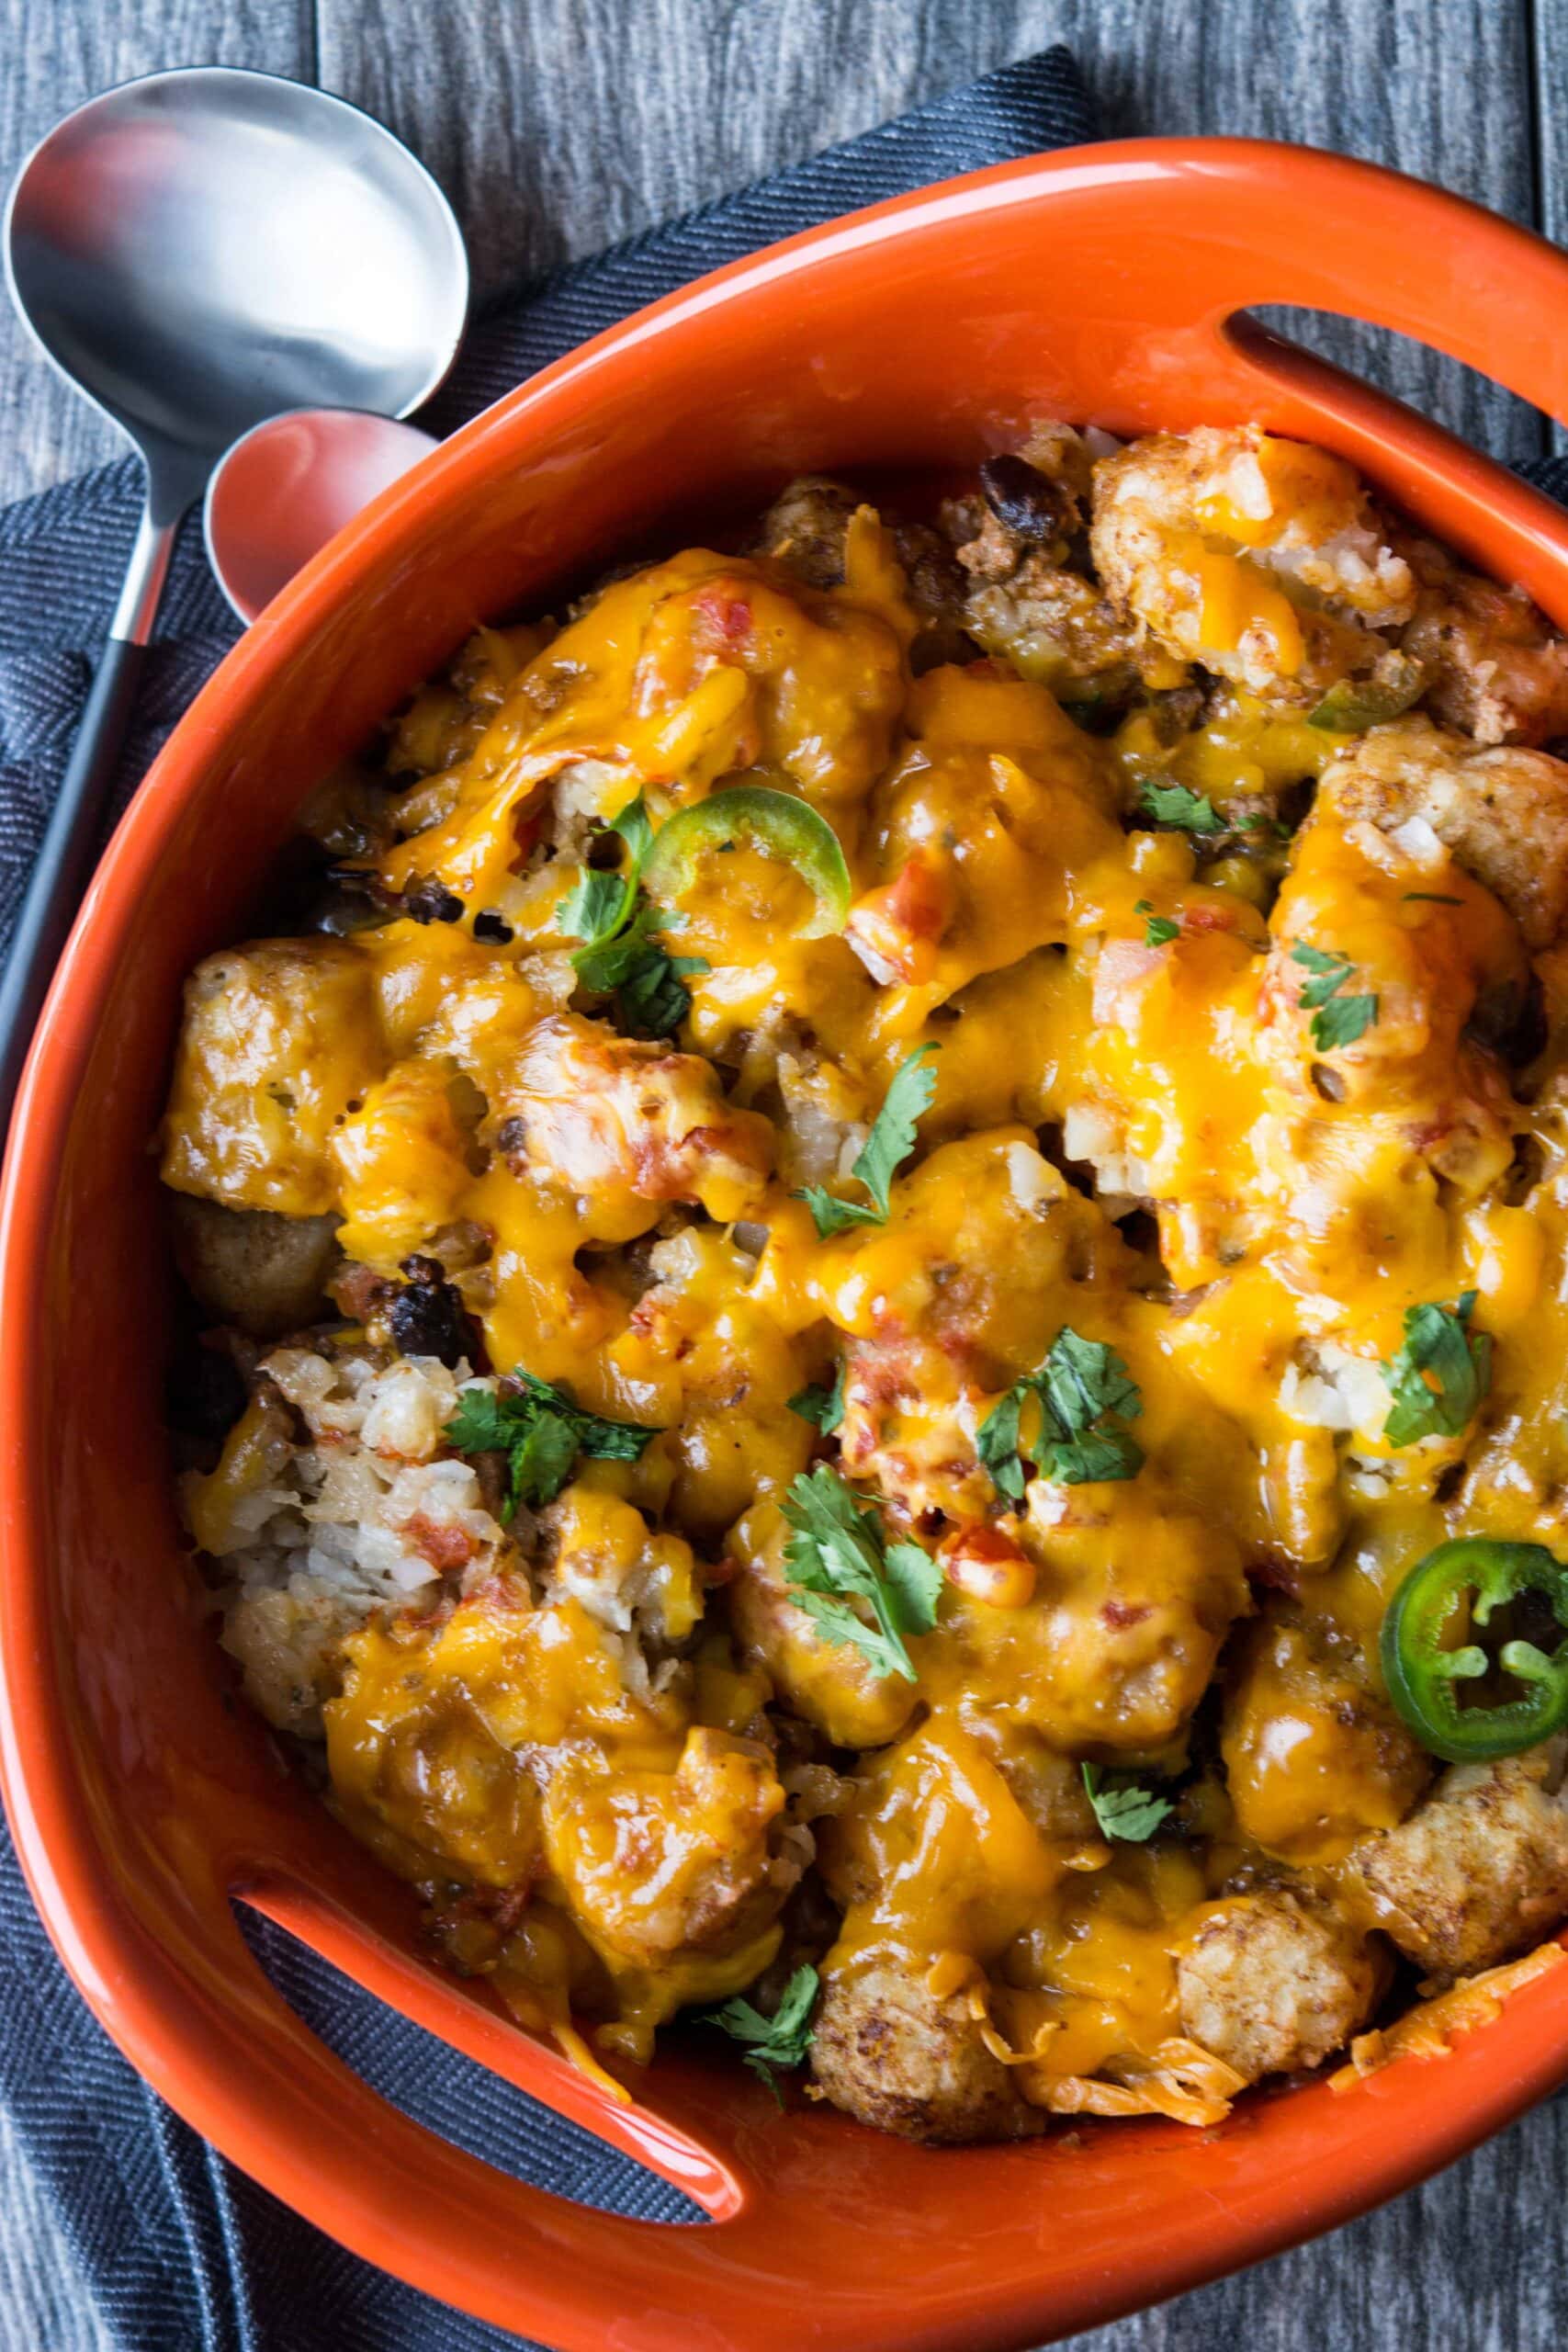 Slow Cooker Taco Tater Tot Casserole